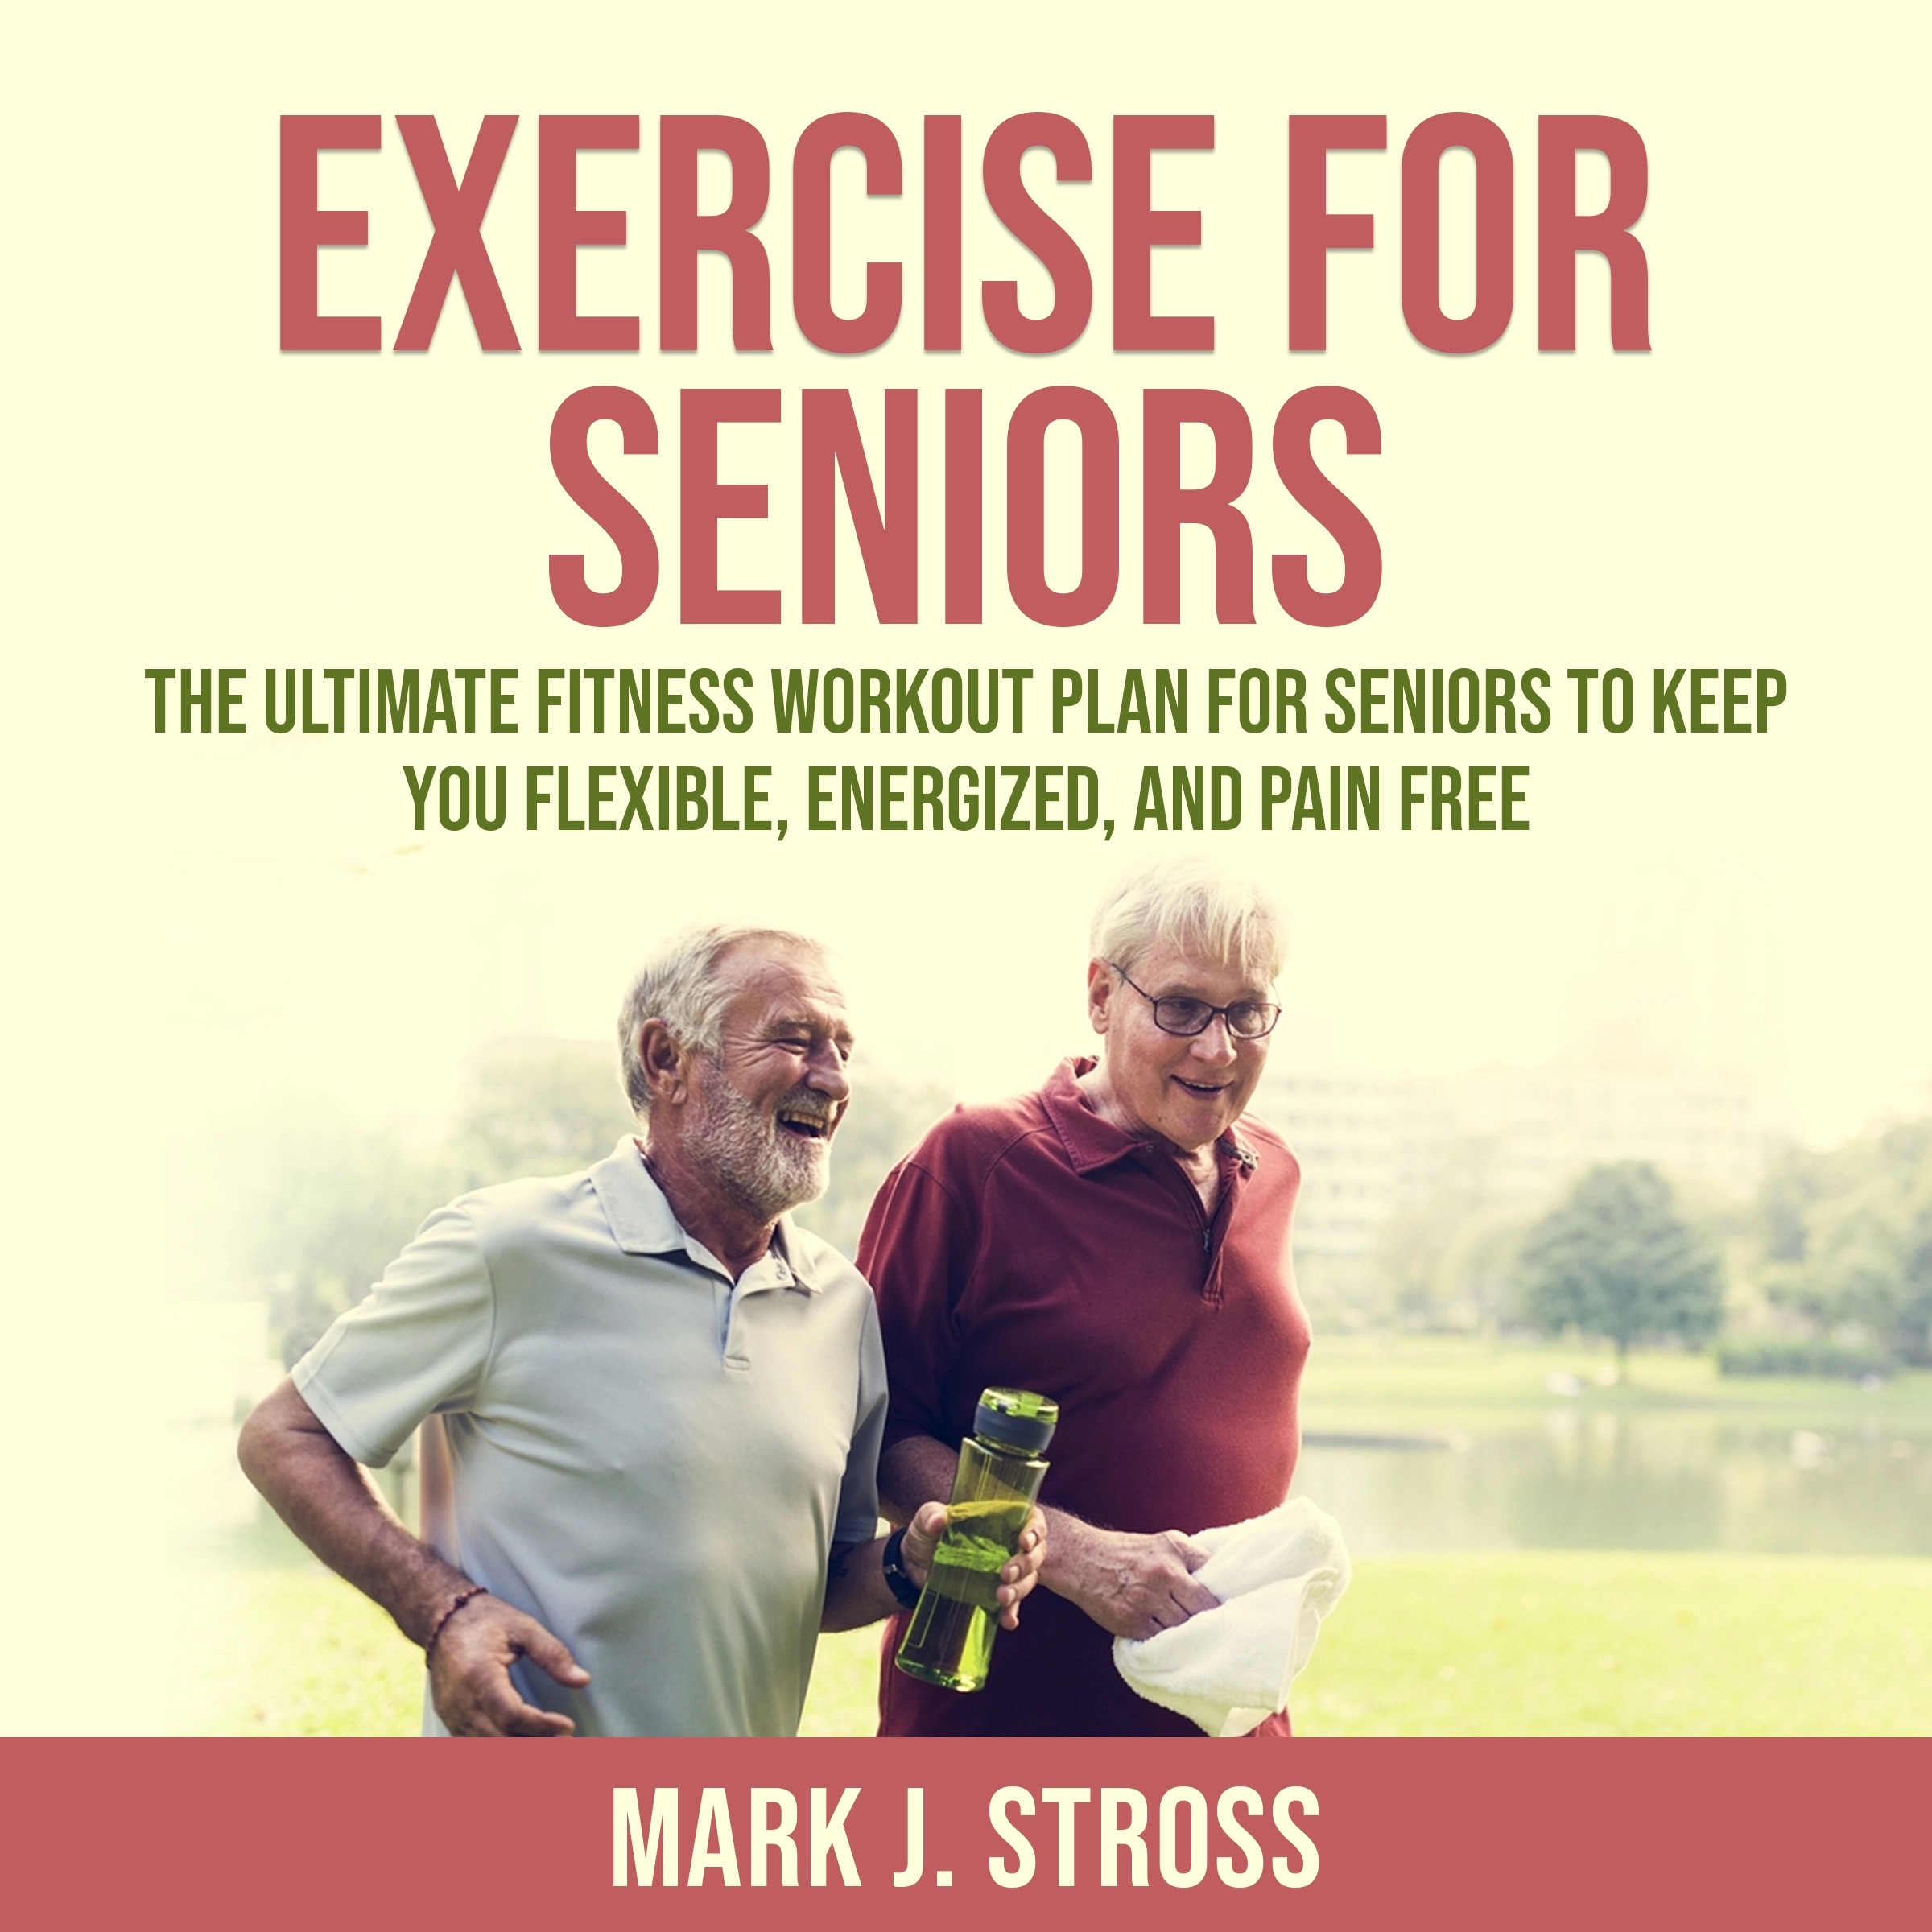 Exercise for Seniors: The Ultimate Fitness Workout Plan for Seniors to Keep You Flexible, Energized, and Pain Free by Mark J. Stross Audiobook